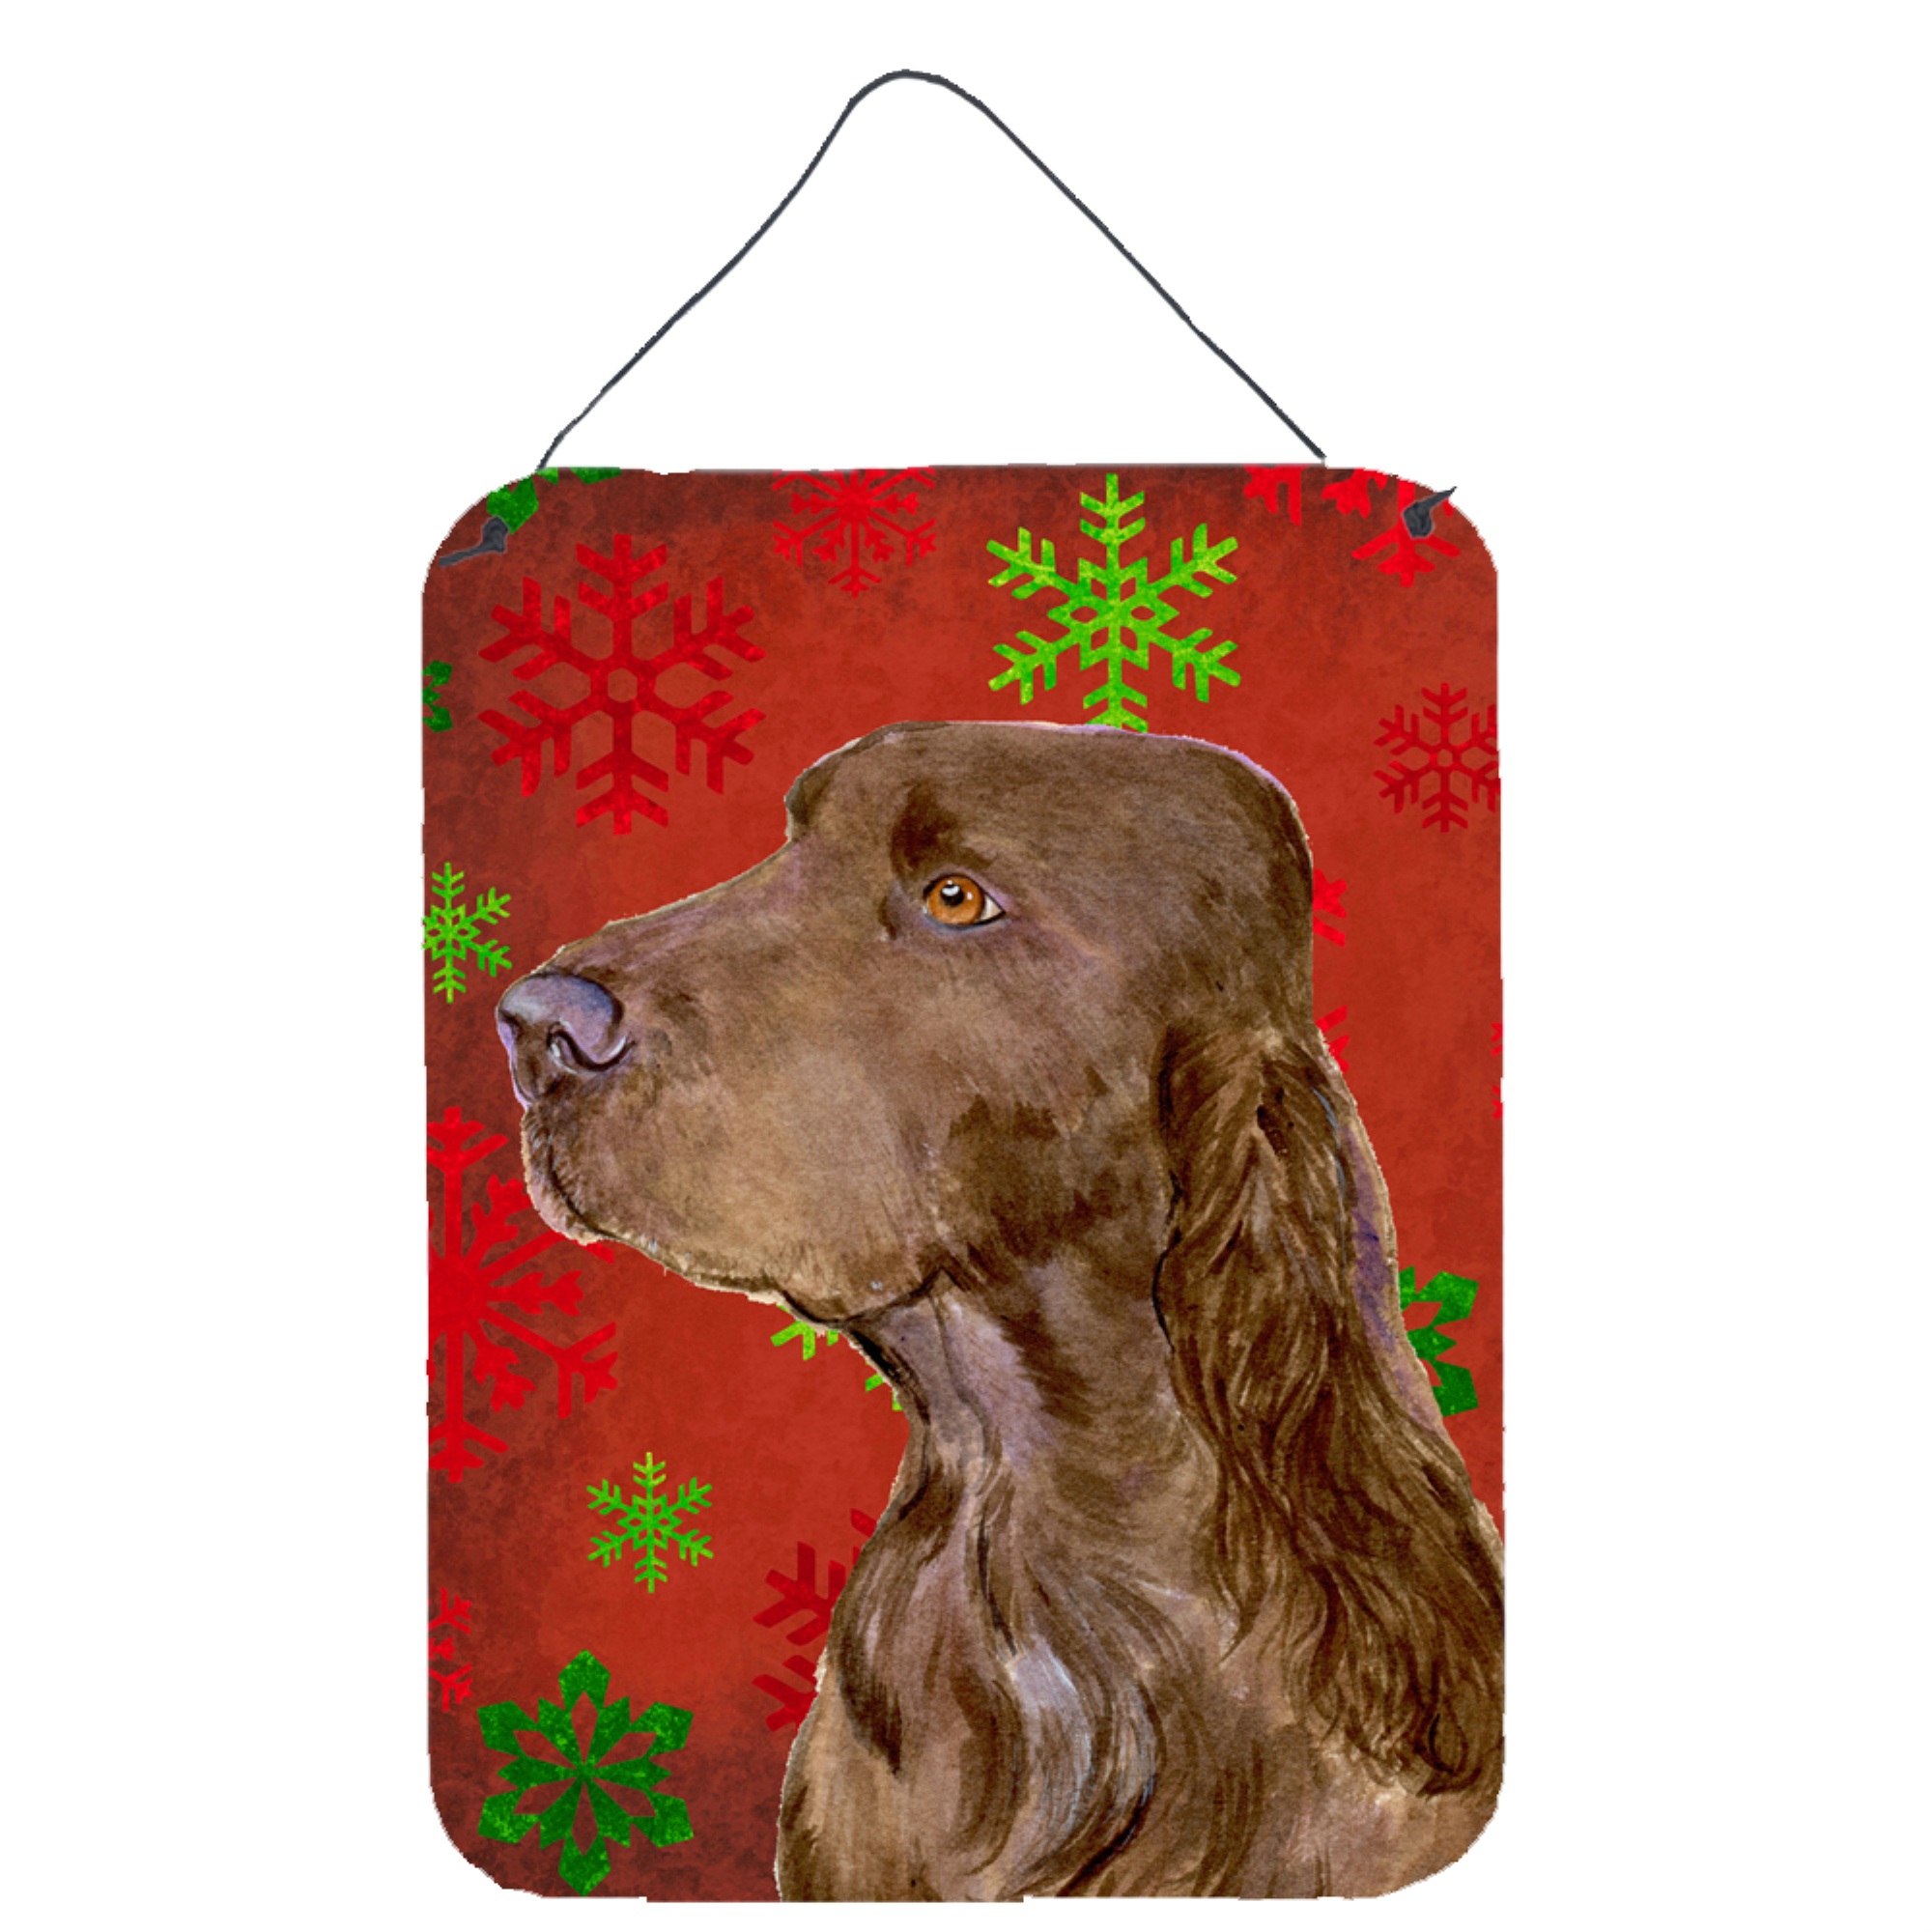 Caroline's Treasures "Caroline's Treasures Field Spaniel Red Snowflakes Holiday Christmas Wall or Door Hanging Prints, 16"" x 12"", Multicolor"